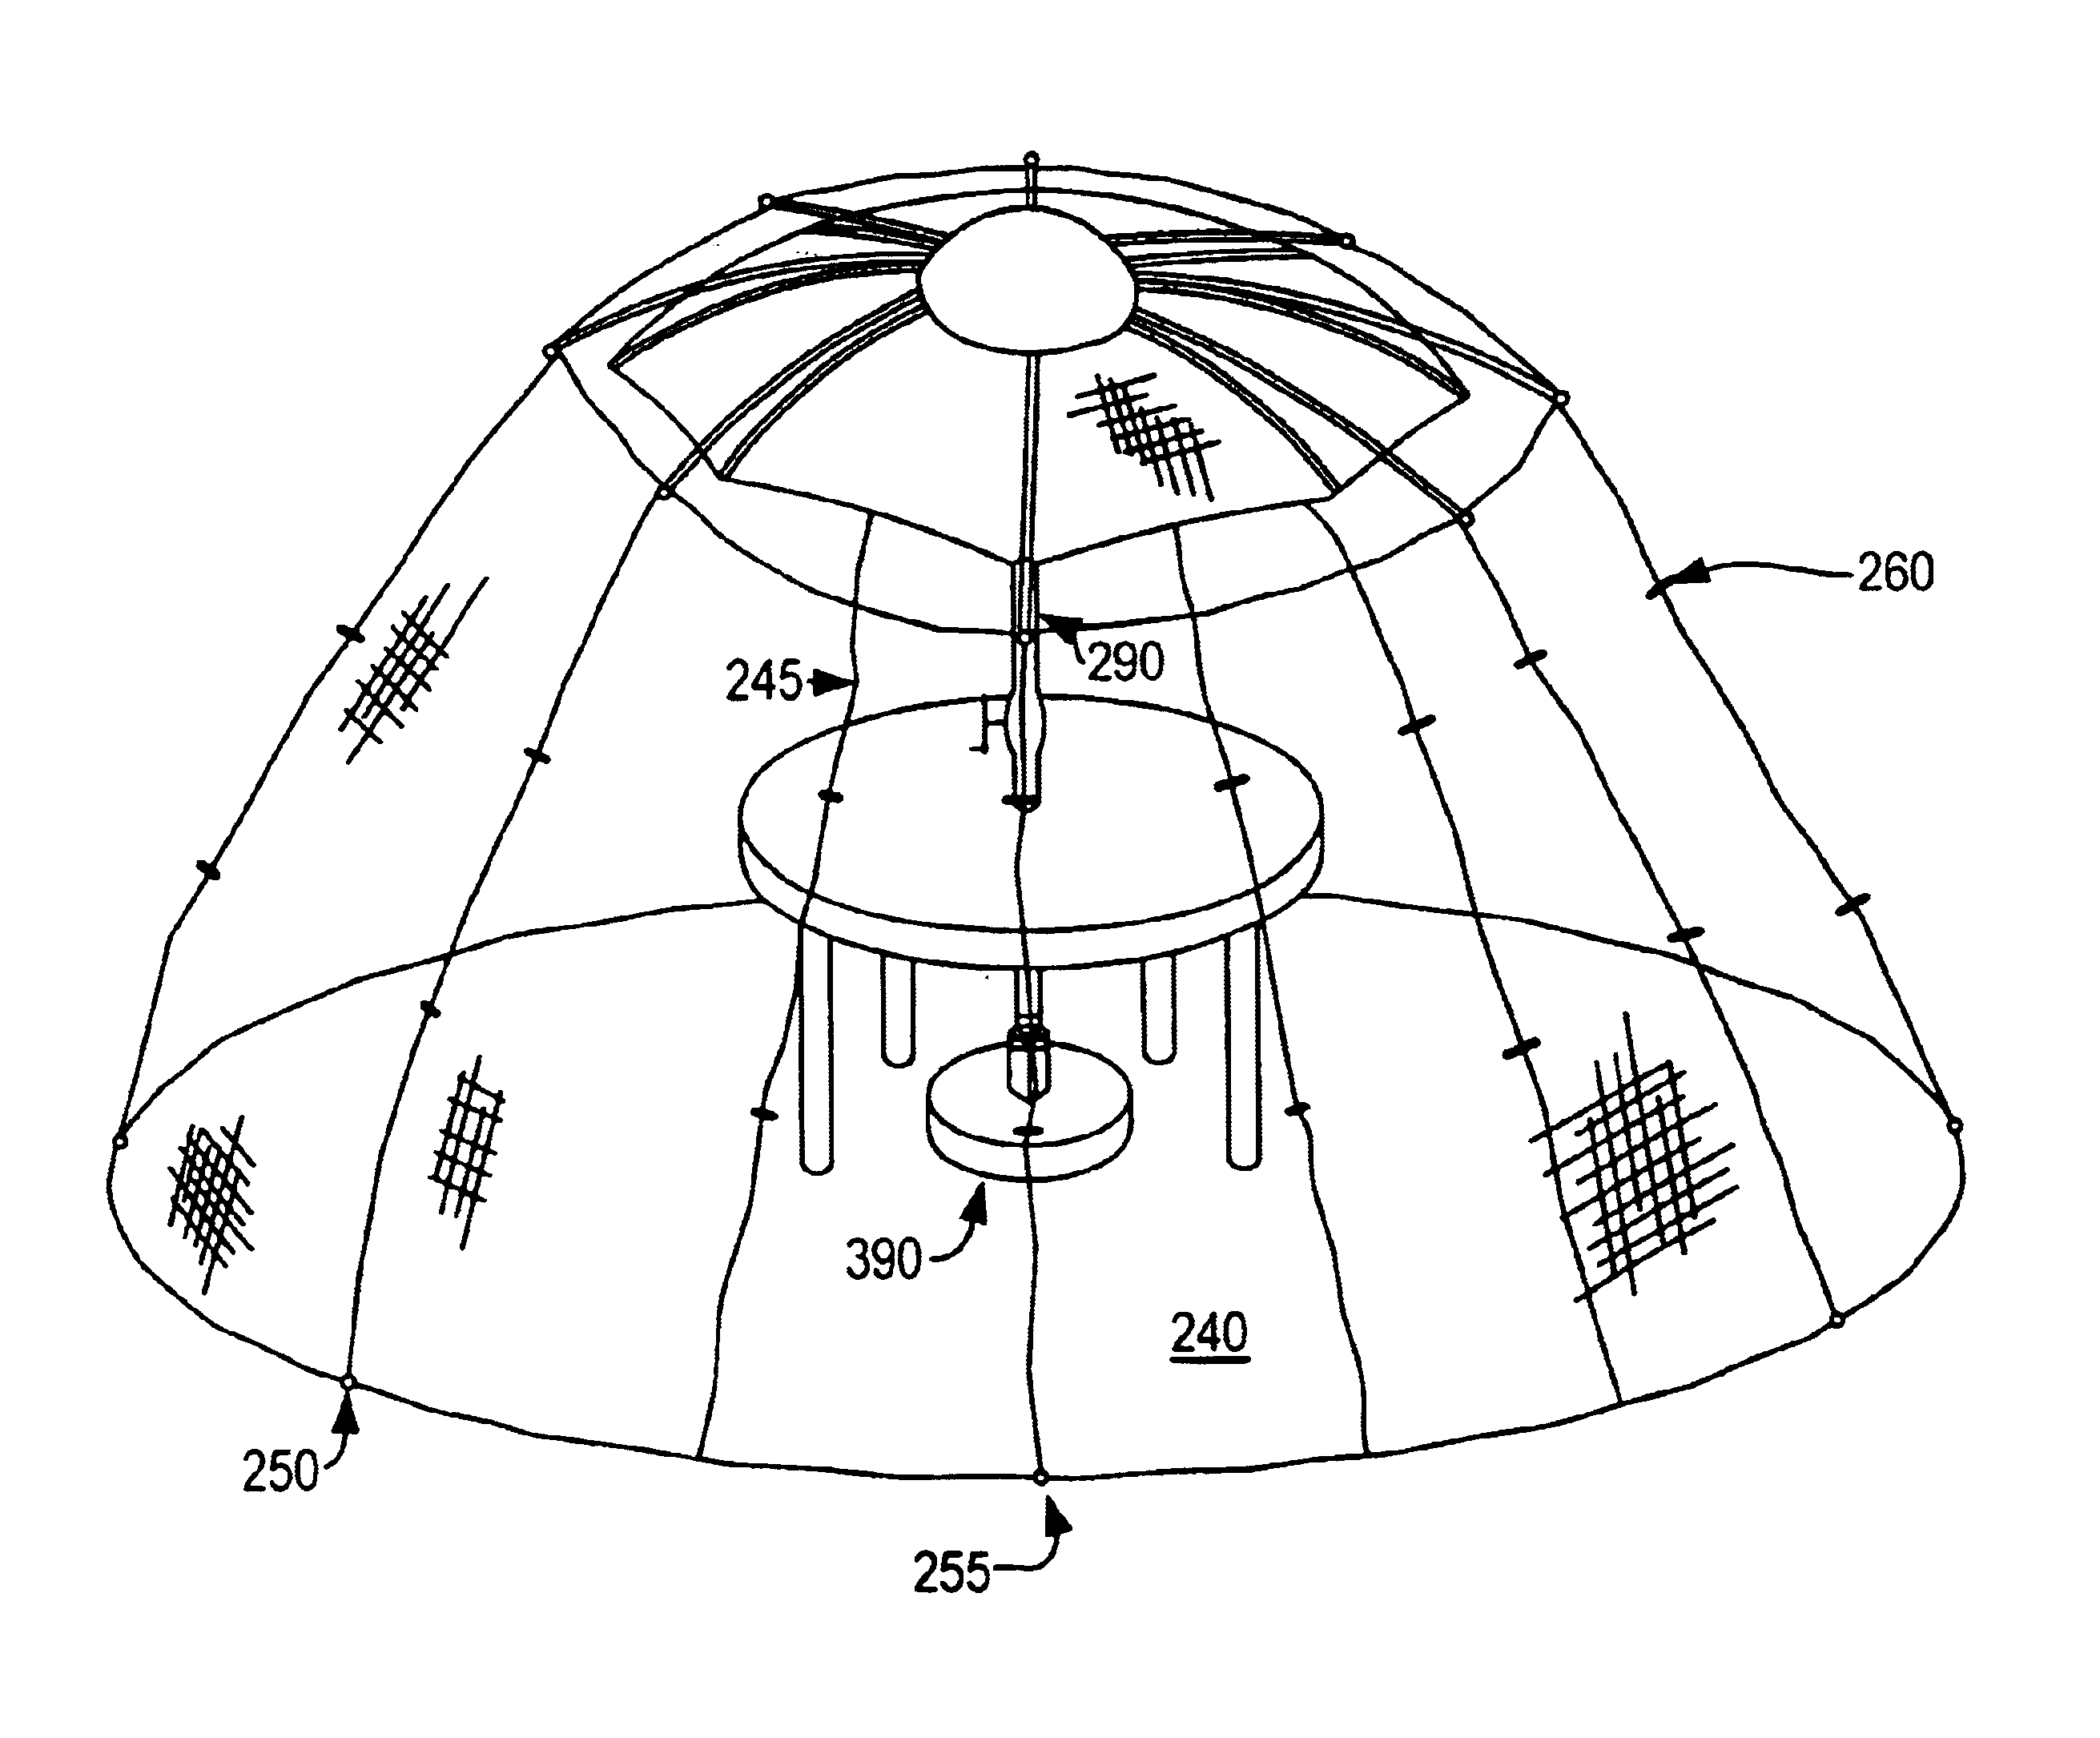 Umbrella with chamber and transport for a canopeum